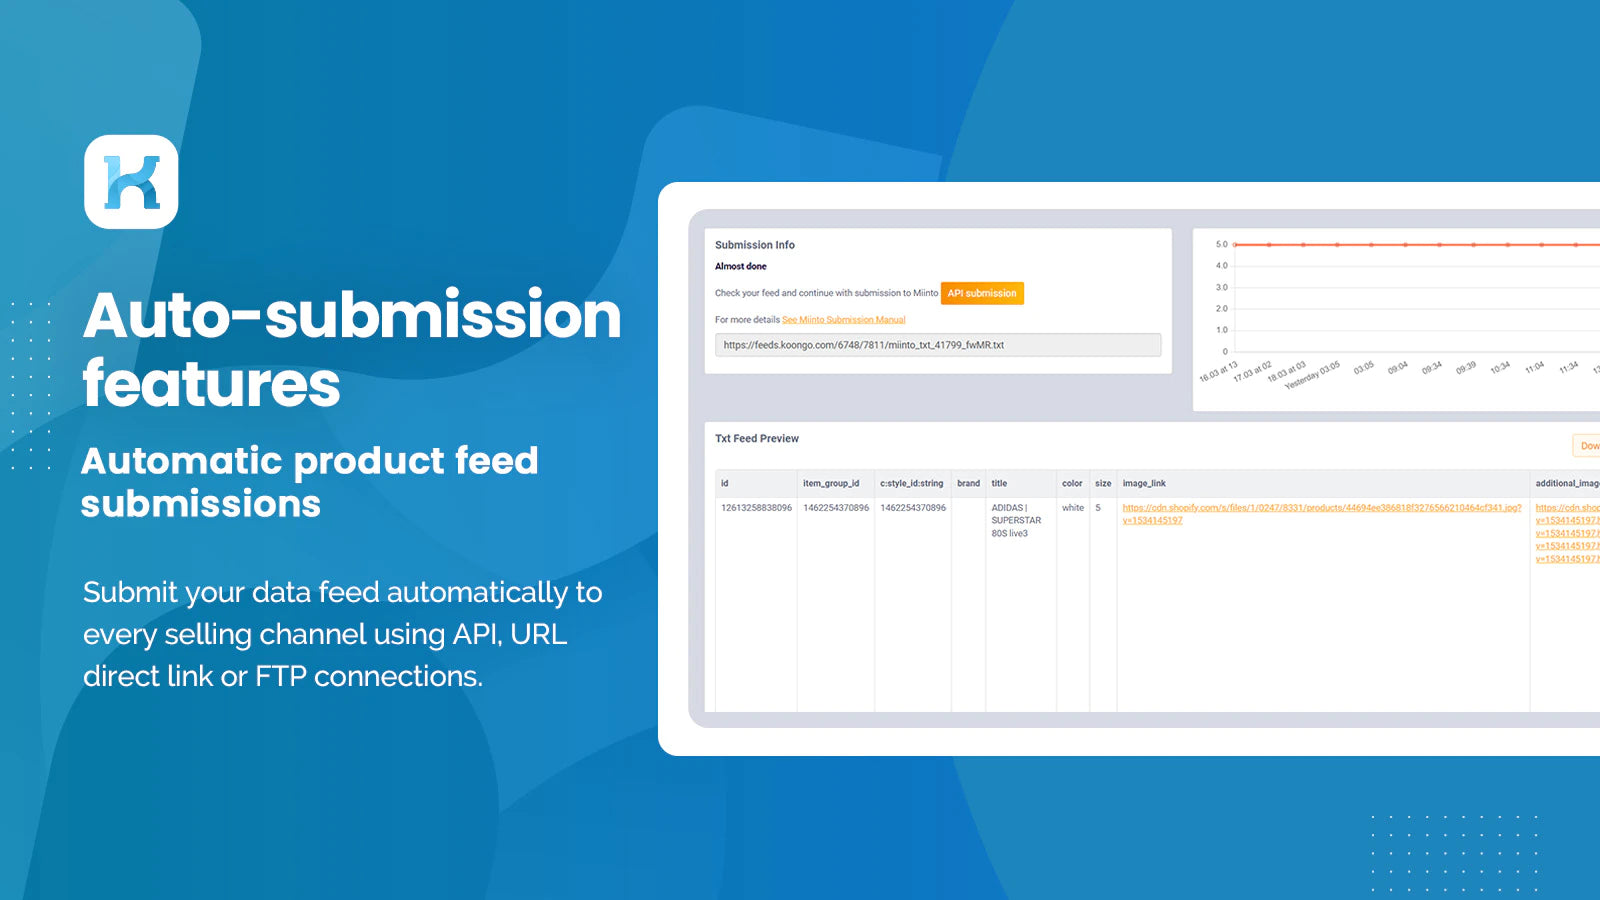 the image shows that you can do automatic product feed submissions